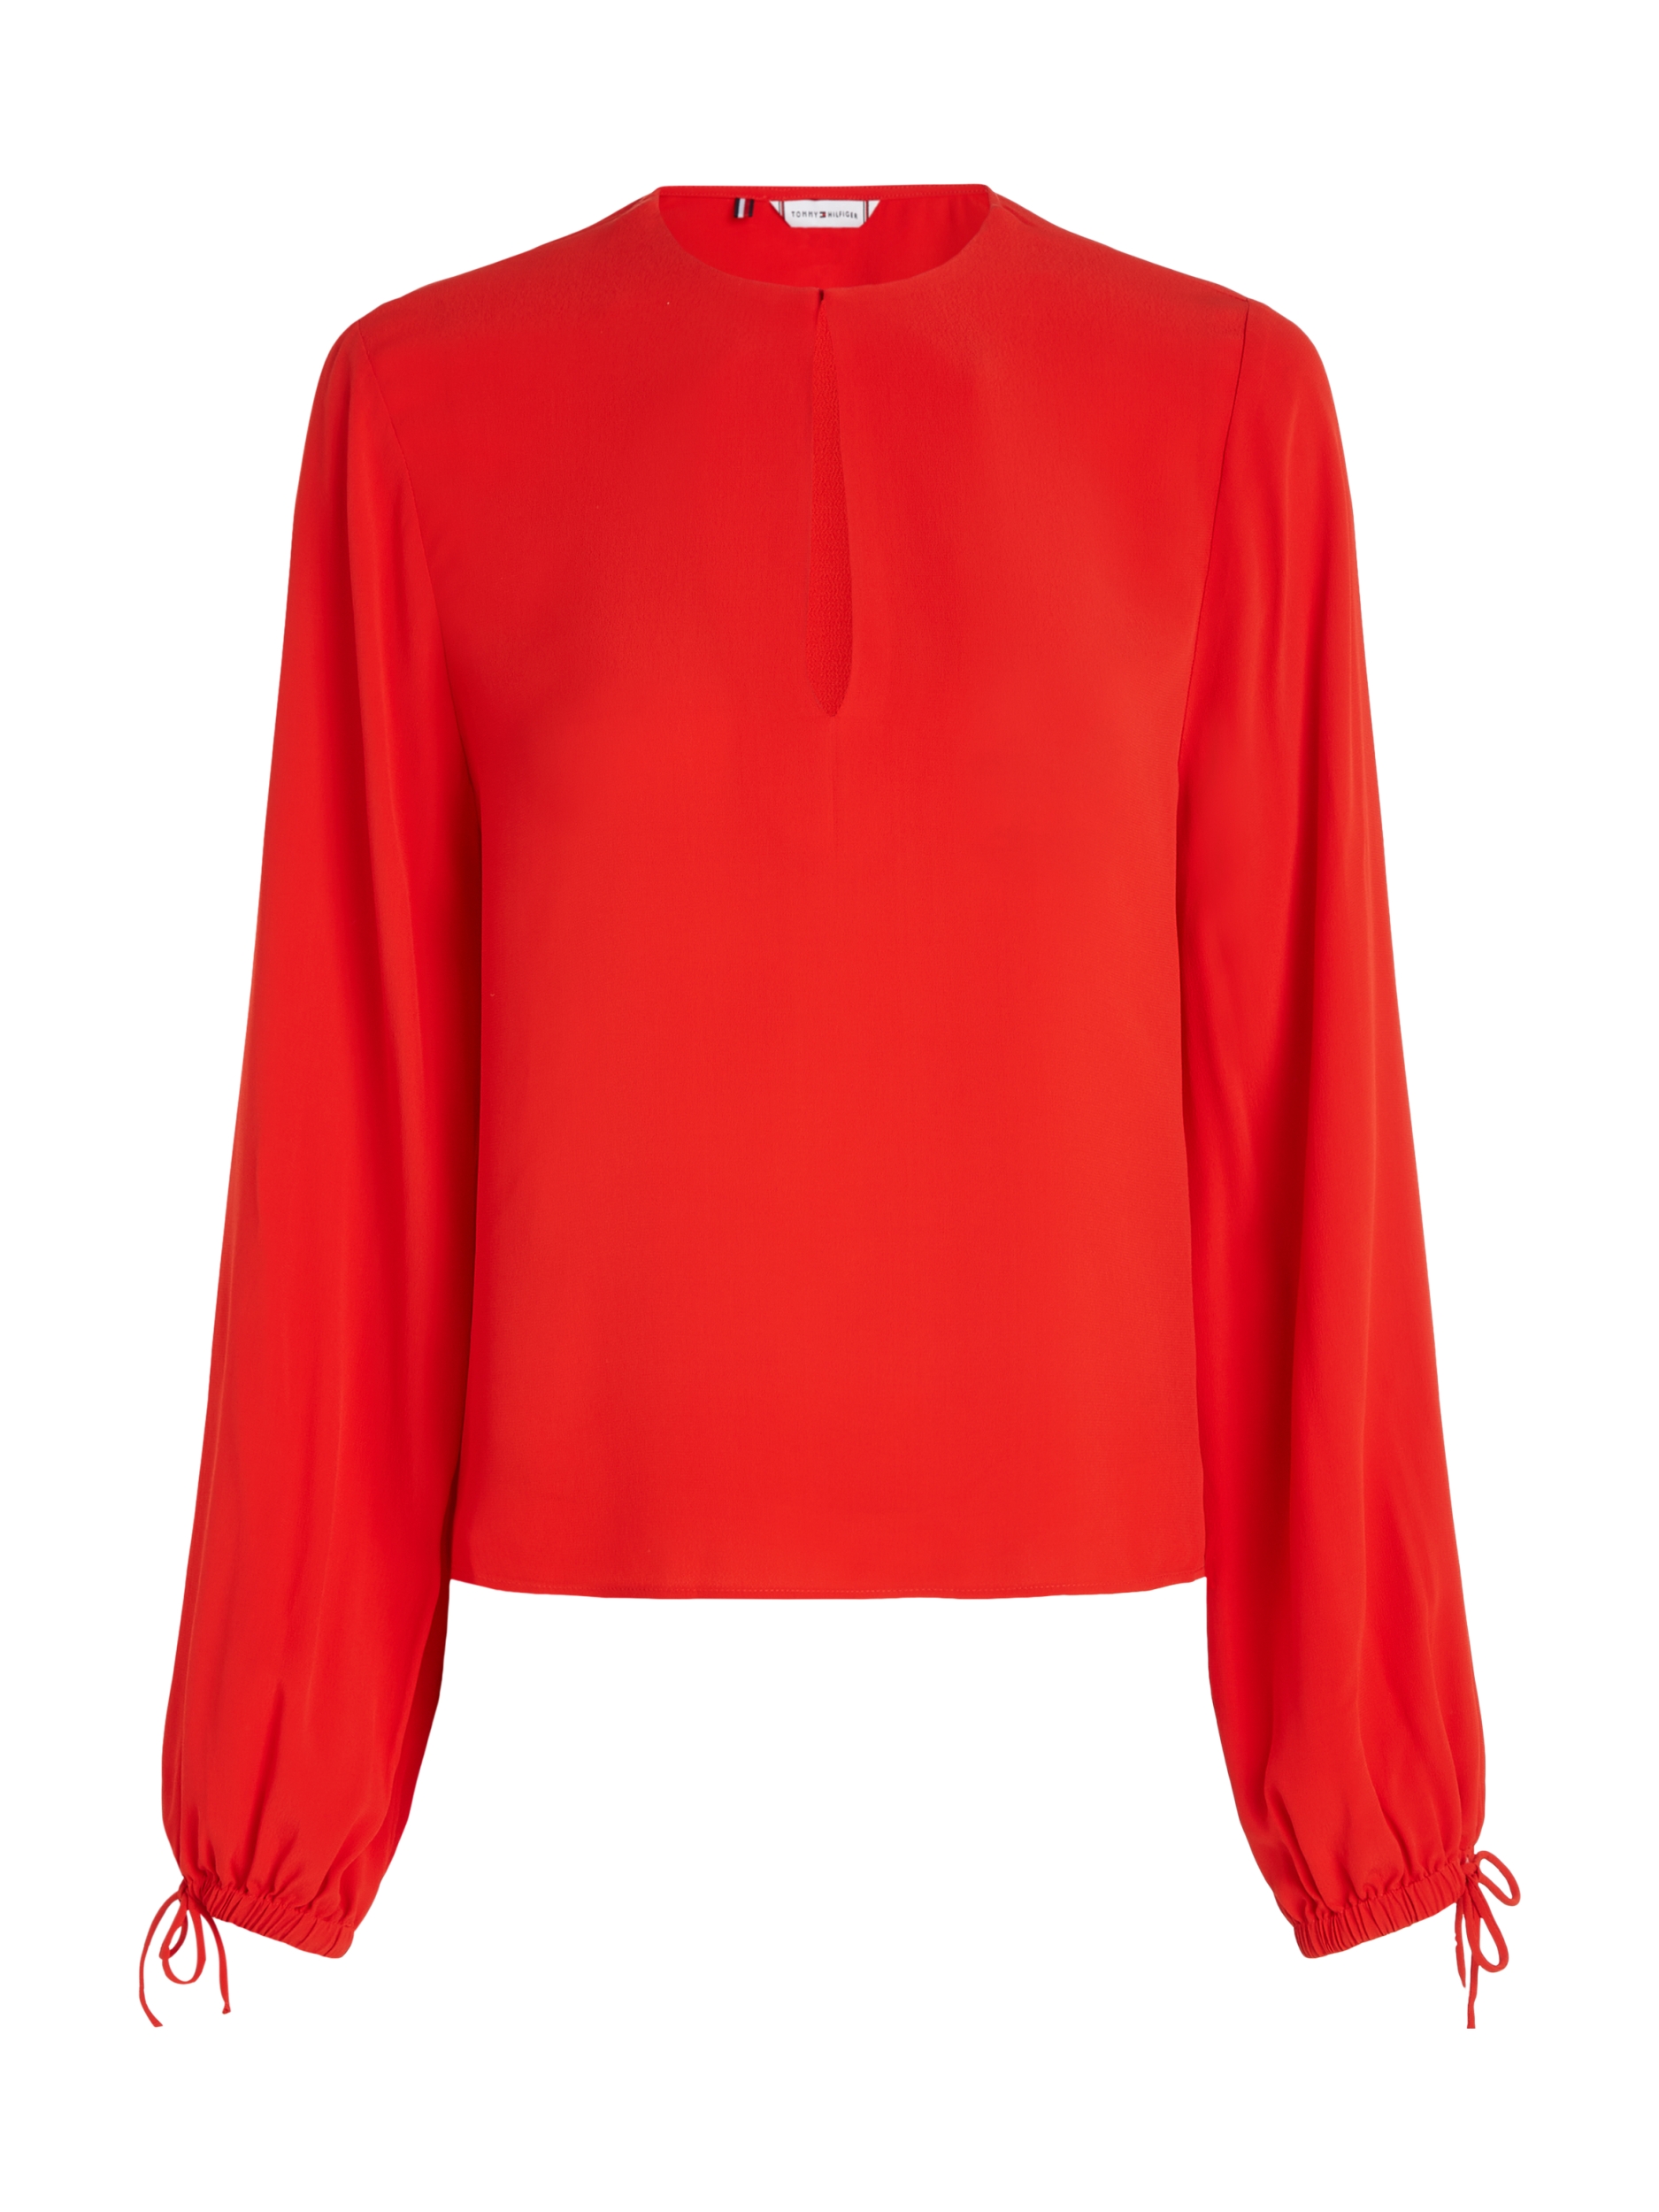 VISCOSE CREPE SOLID VN BLOUSE